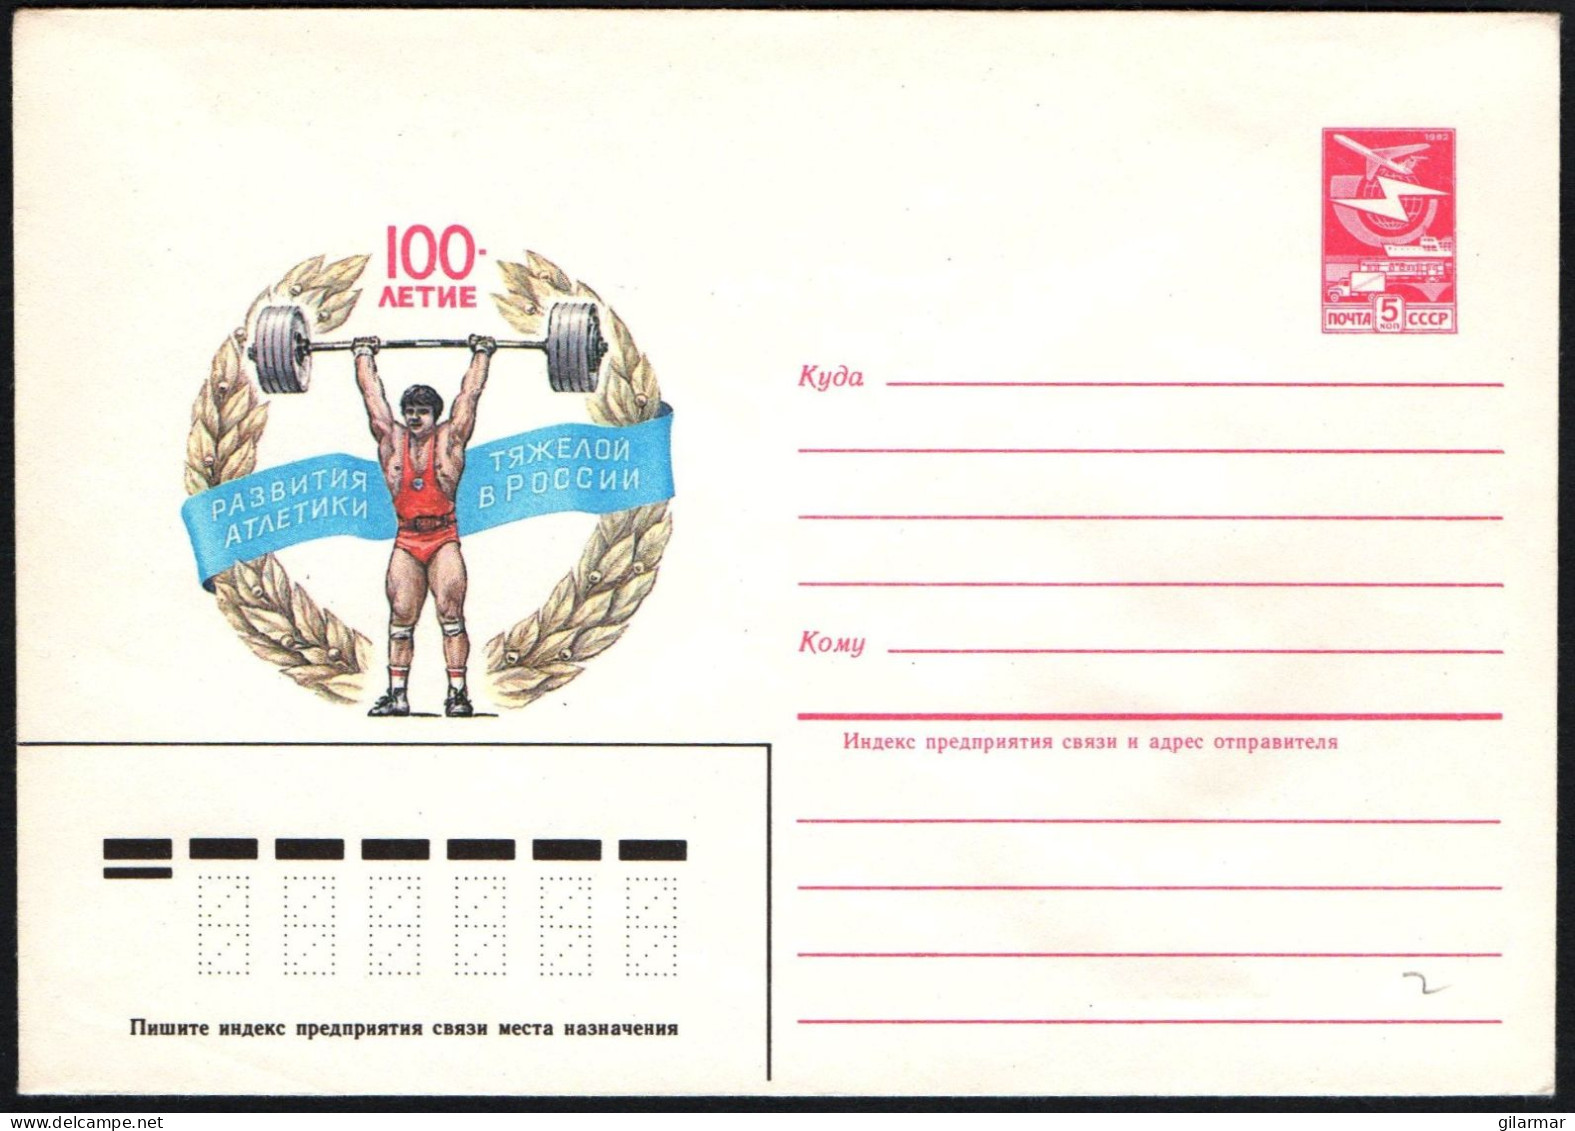 SOVIET UNION 1984 - 100th ANNIVERSARY OF WEIGHTLIFTING IN RUSSIA - MINT POSTAL STATIONERY - G - Pesistica